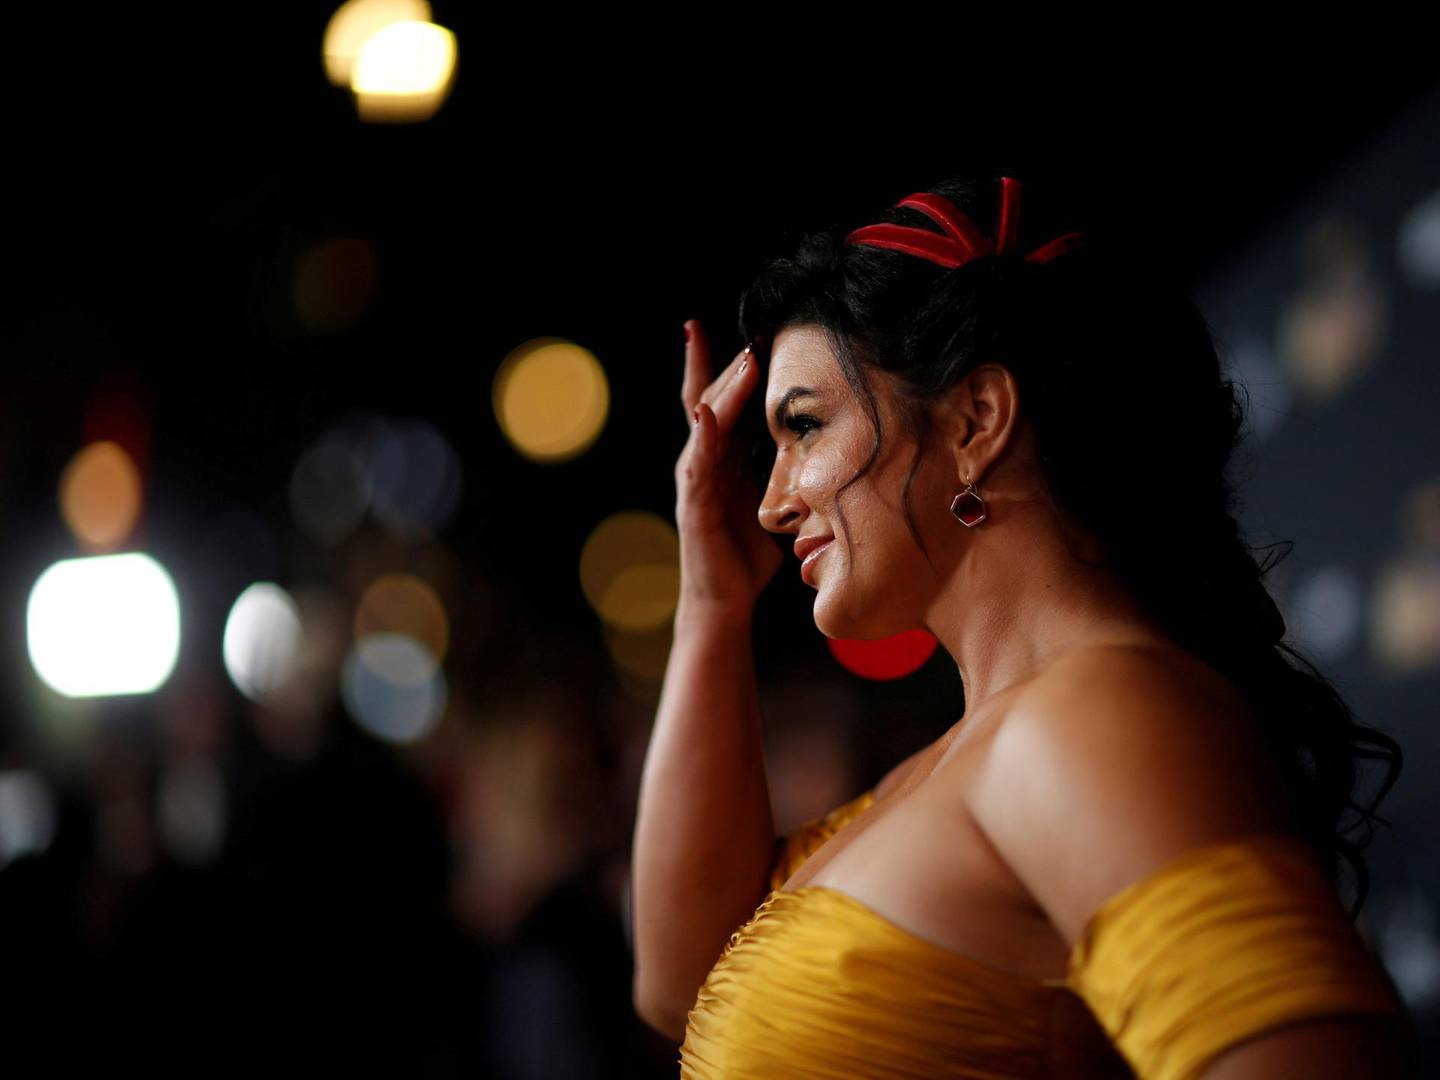 FILE PHOTO: Cast member Gina Carano poses at the premiere for the television series "The Mandalorian" in Los Angeles, California, U.S., November 13, 2019. REUTERS/Mario Anzuoni/File Photo